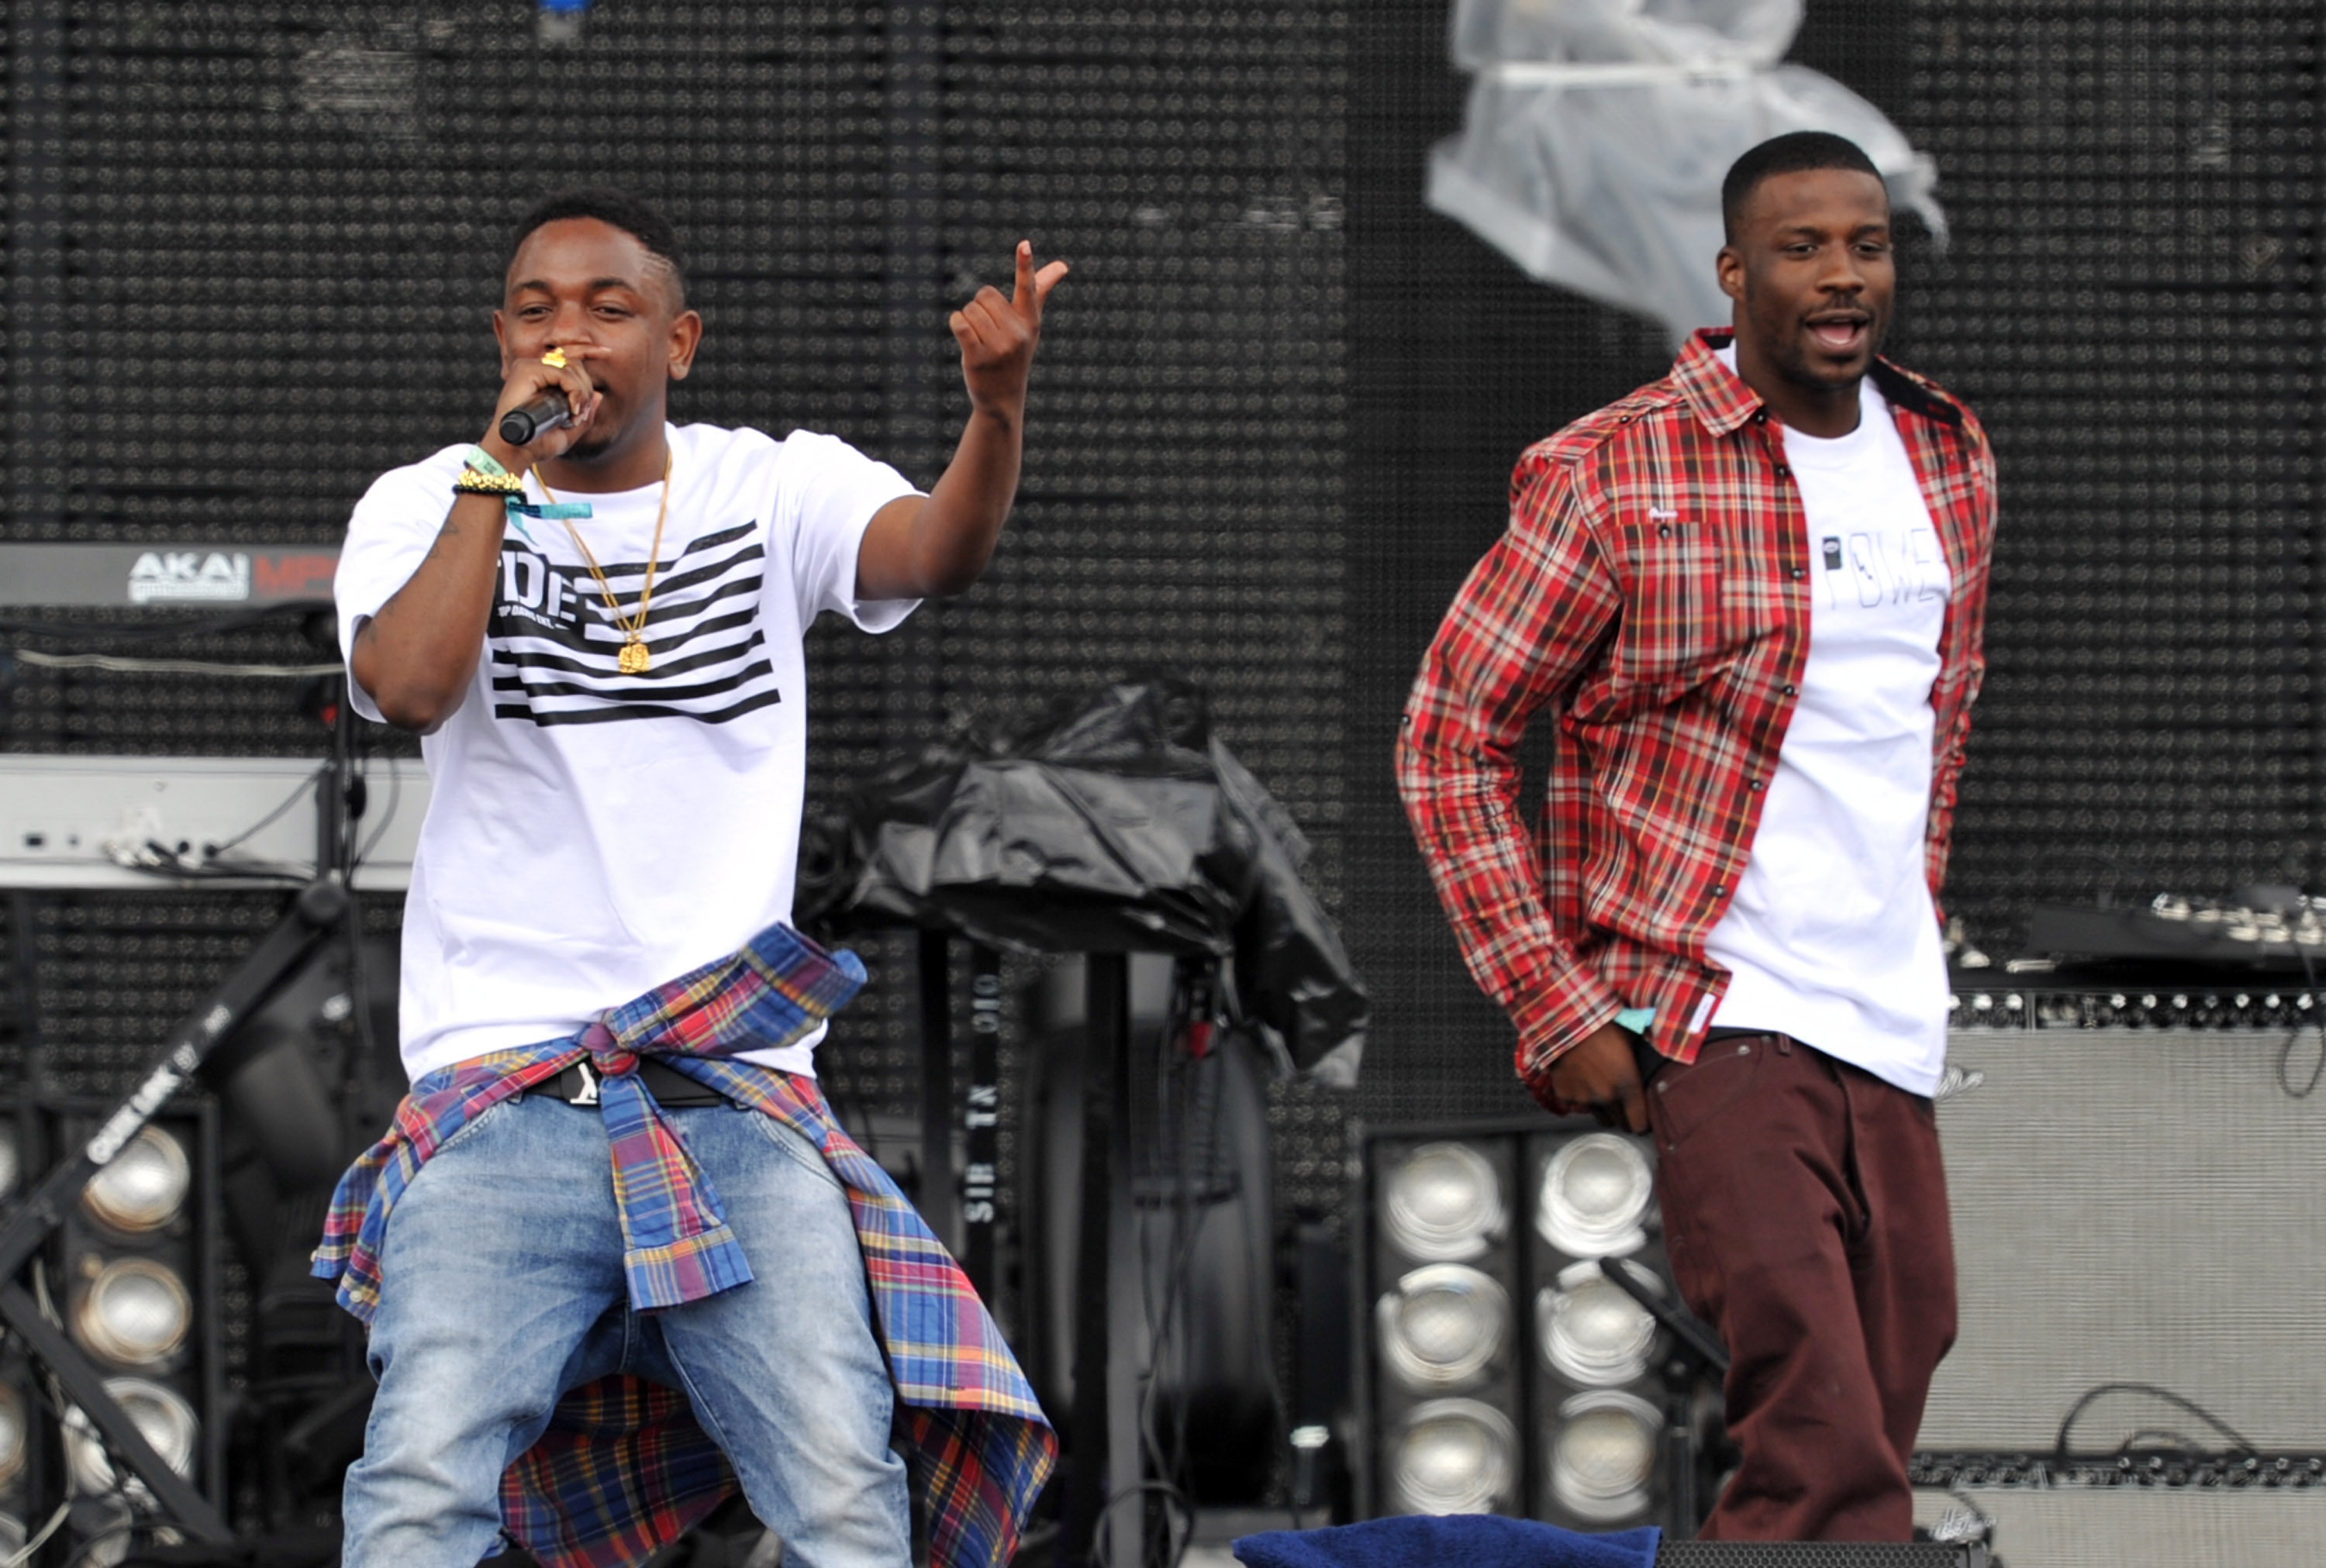 INDIO, CA - APRIL 13:  Rappers Kendrick Lamar (L) and Jay Rock perform onstage during day 1 of the 2012 Coachella Valley Music & Arts Festival at the Empire Polo Field on April 13, 2012 in Indio, California.  (Photo by Kevin Winter/Getty Images for Coachella)